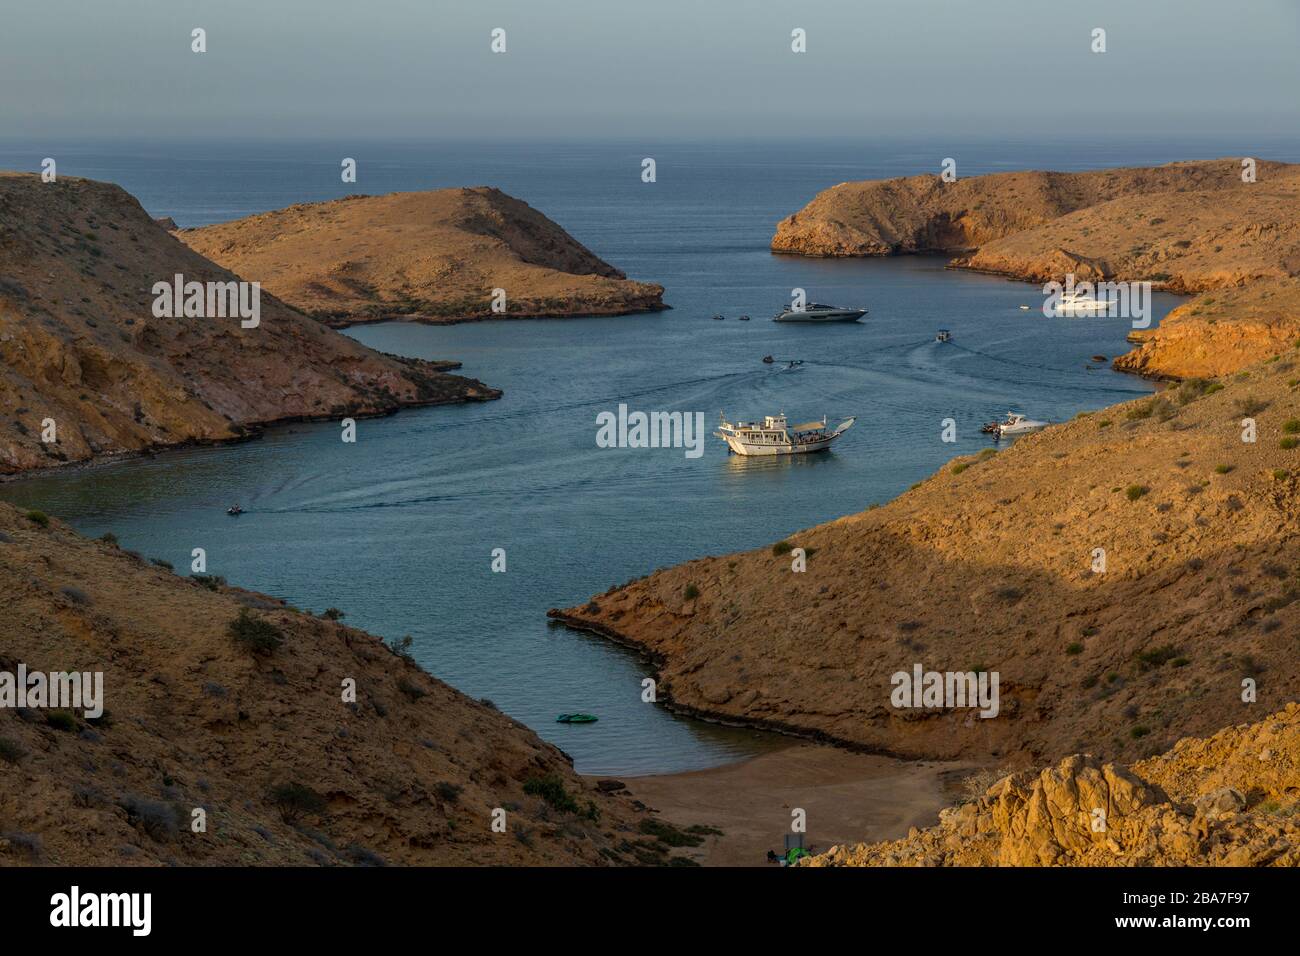 A bay at Bander Al Khayran, or Bander Al Khairan, just east of Muscat in Oman. Pleasure boats can be seen in the bay. Stock Photo